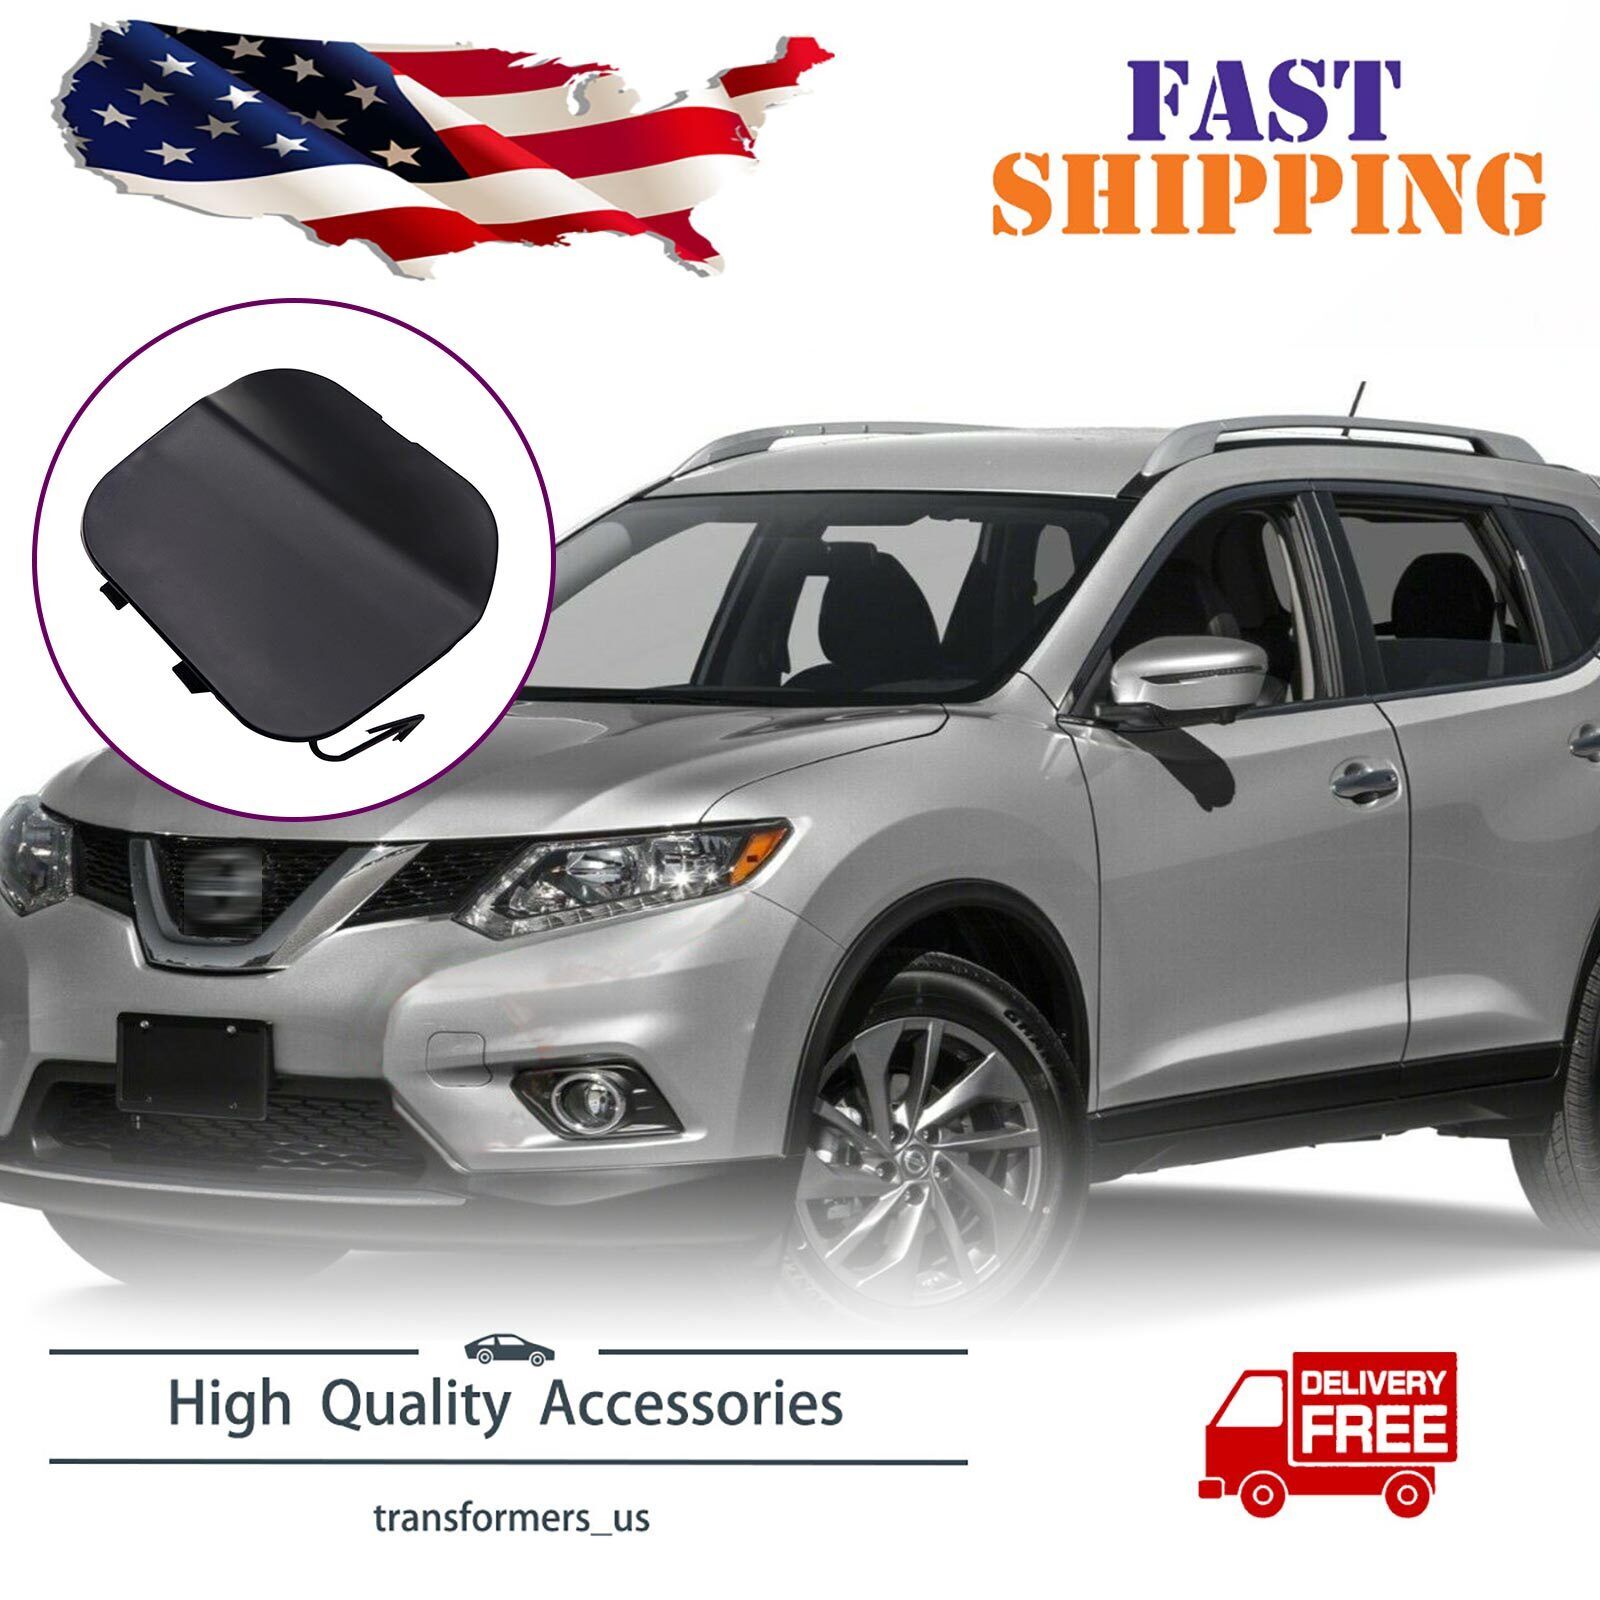 Front Bumper Tow Hook Cap Eye Cover For Nissan Rogue 2014 2015 2016 Front